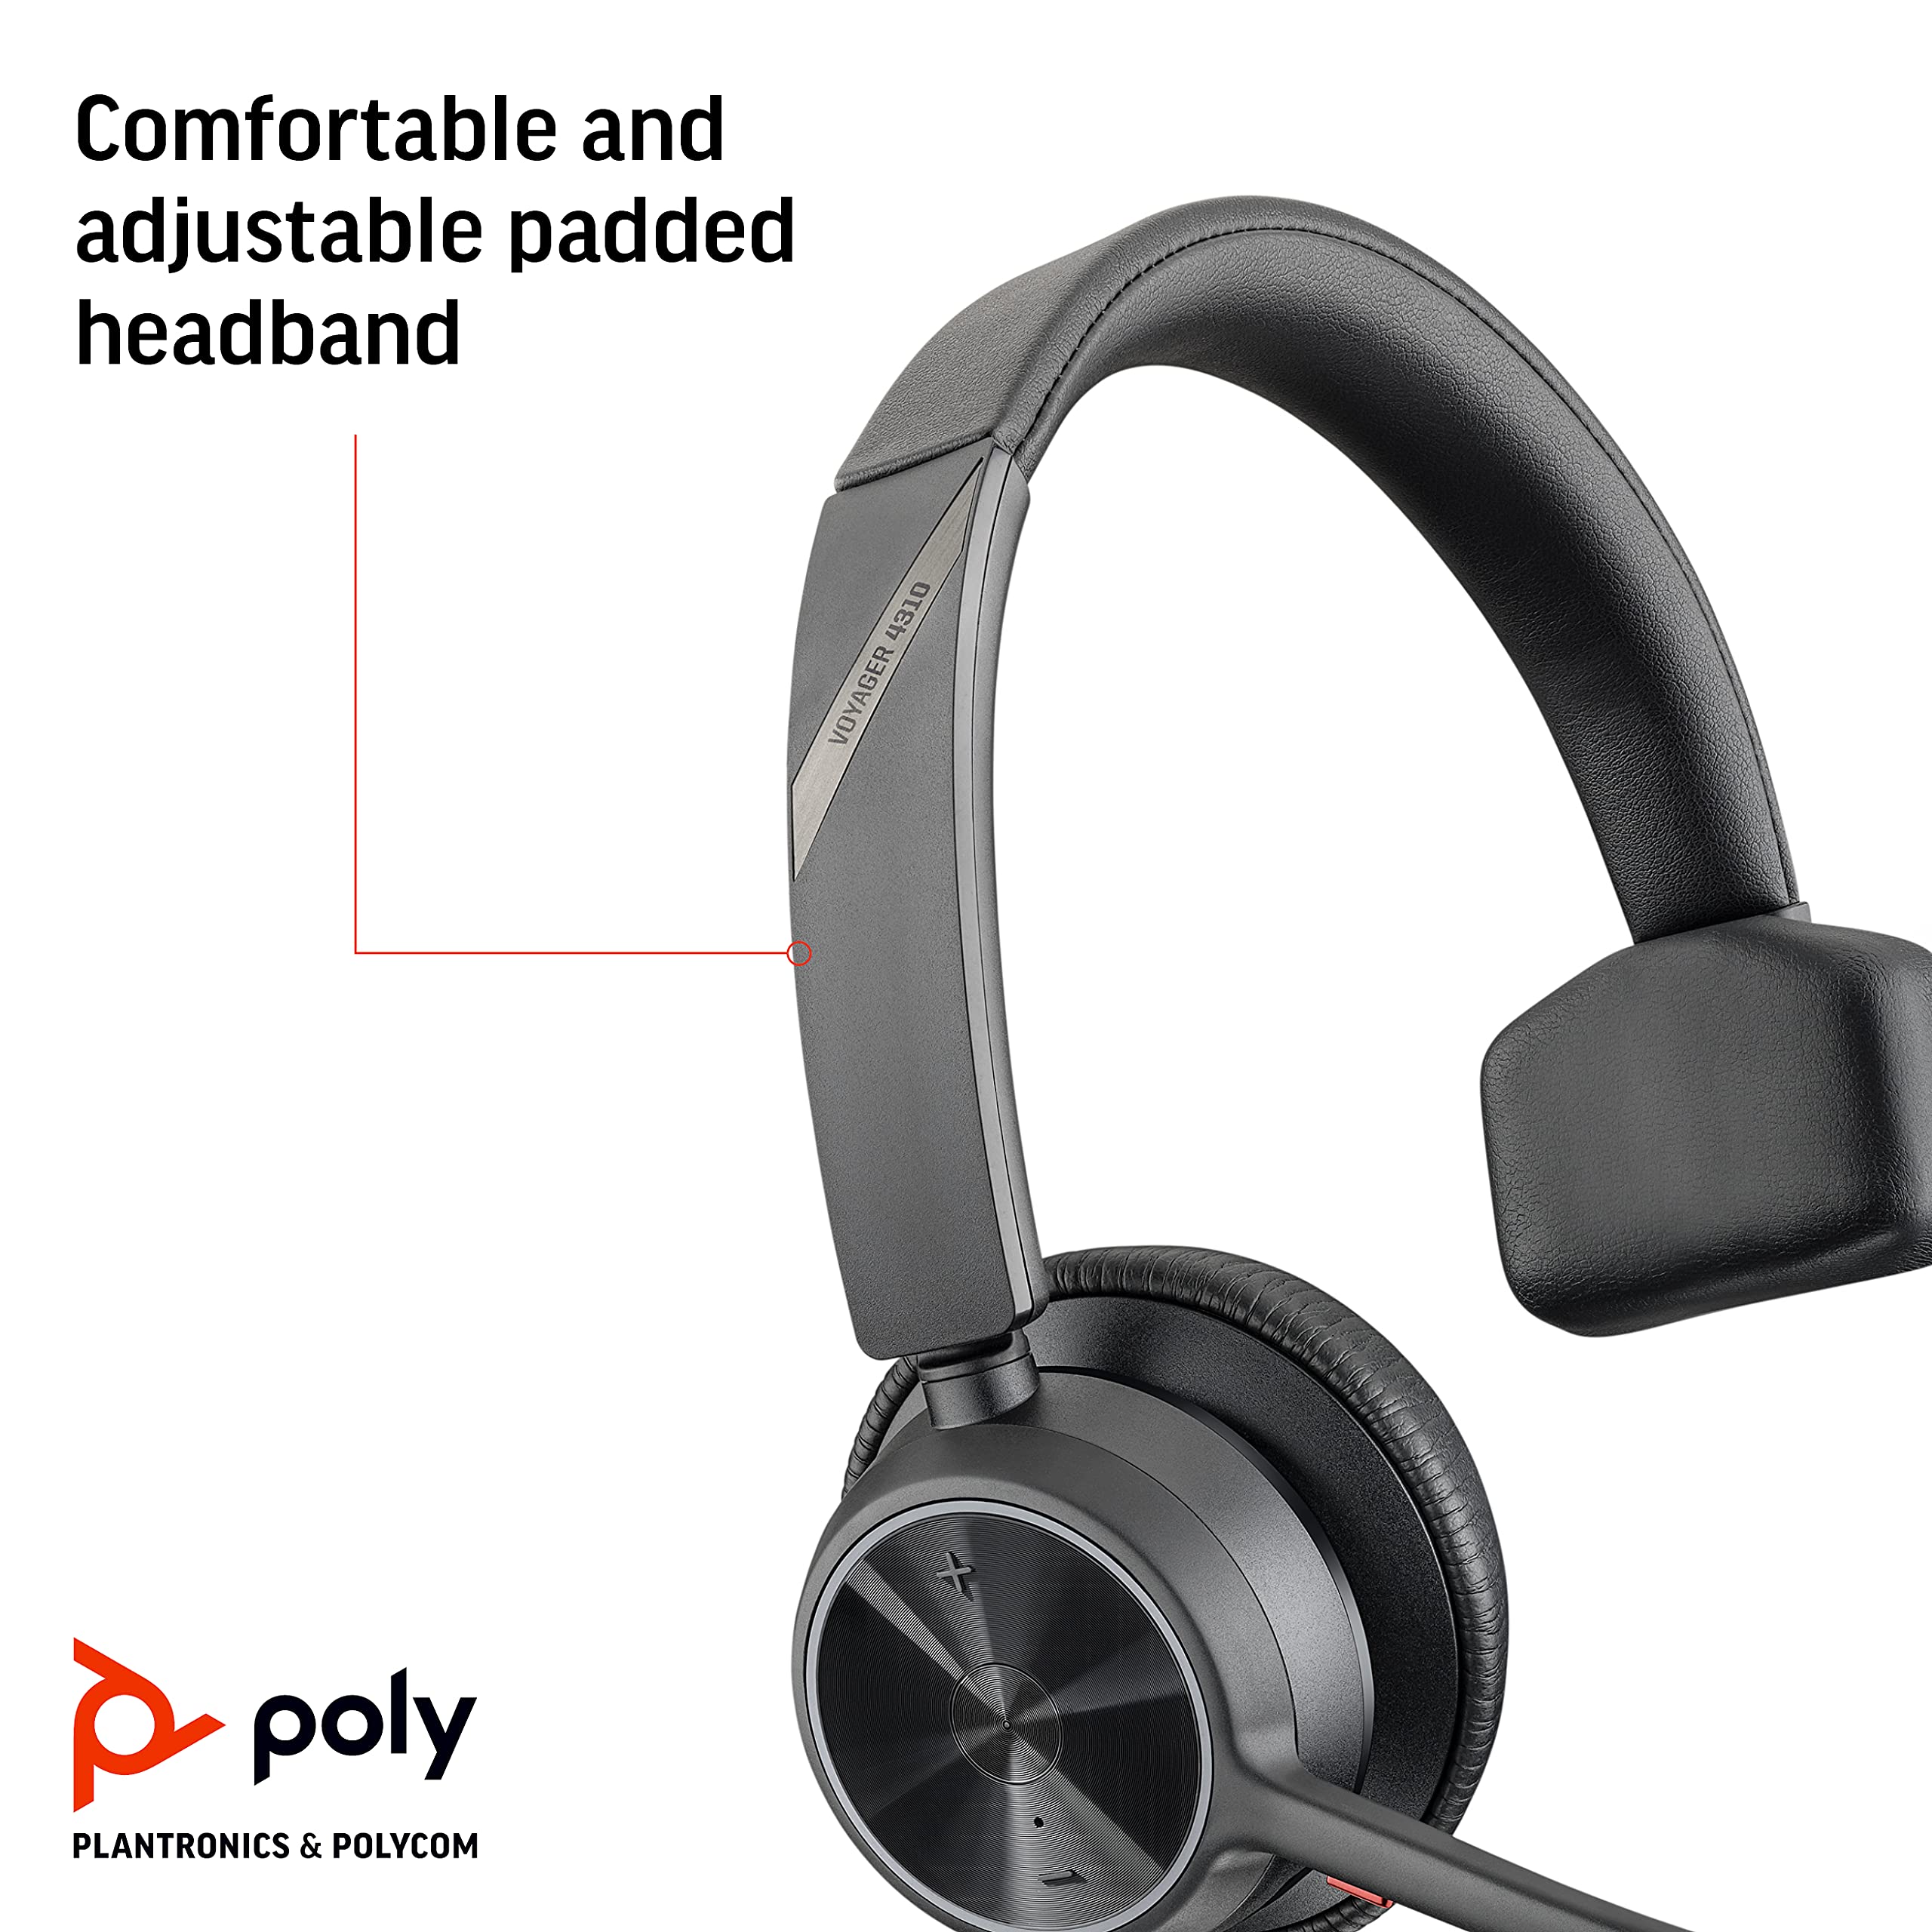 Poly - Voyager 4310 UC Wireless Headset (Plantronics) - Single-Ear Headset with Boom Mic - Connect to PC/Mac via USB-C Bluetooth Adapter, Cell Phone via Bluetooth - Works with Teams, Zoom & More